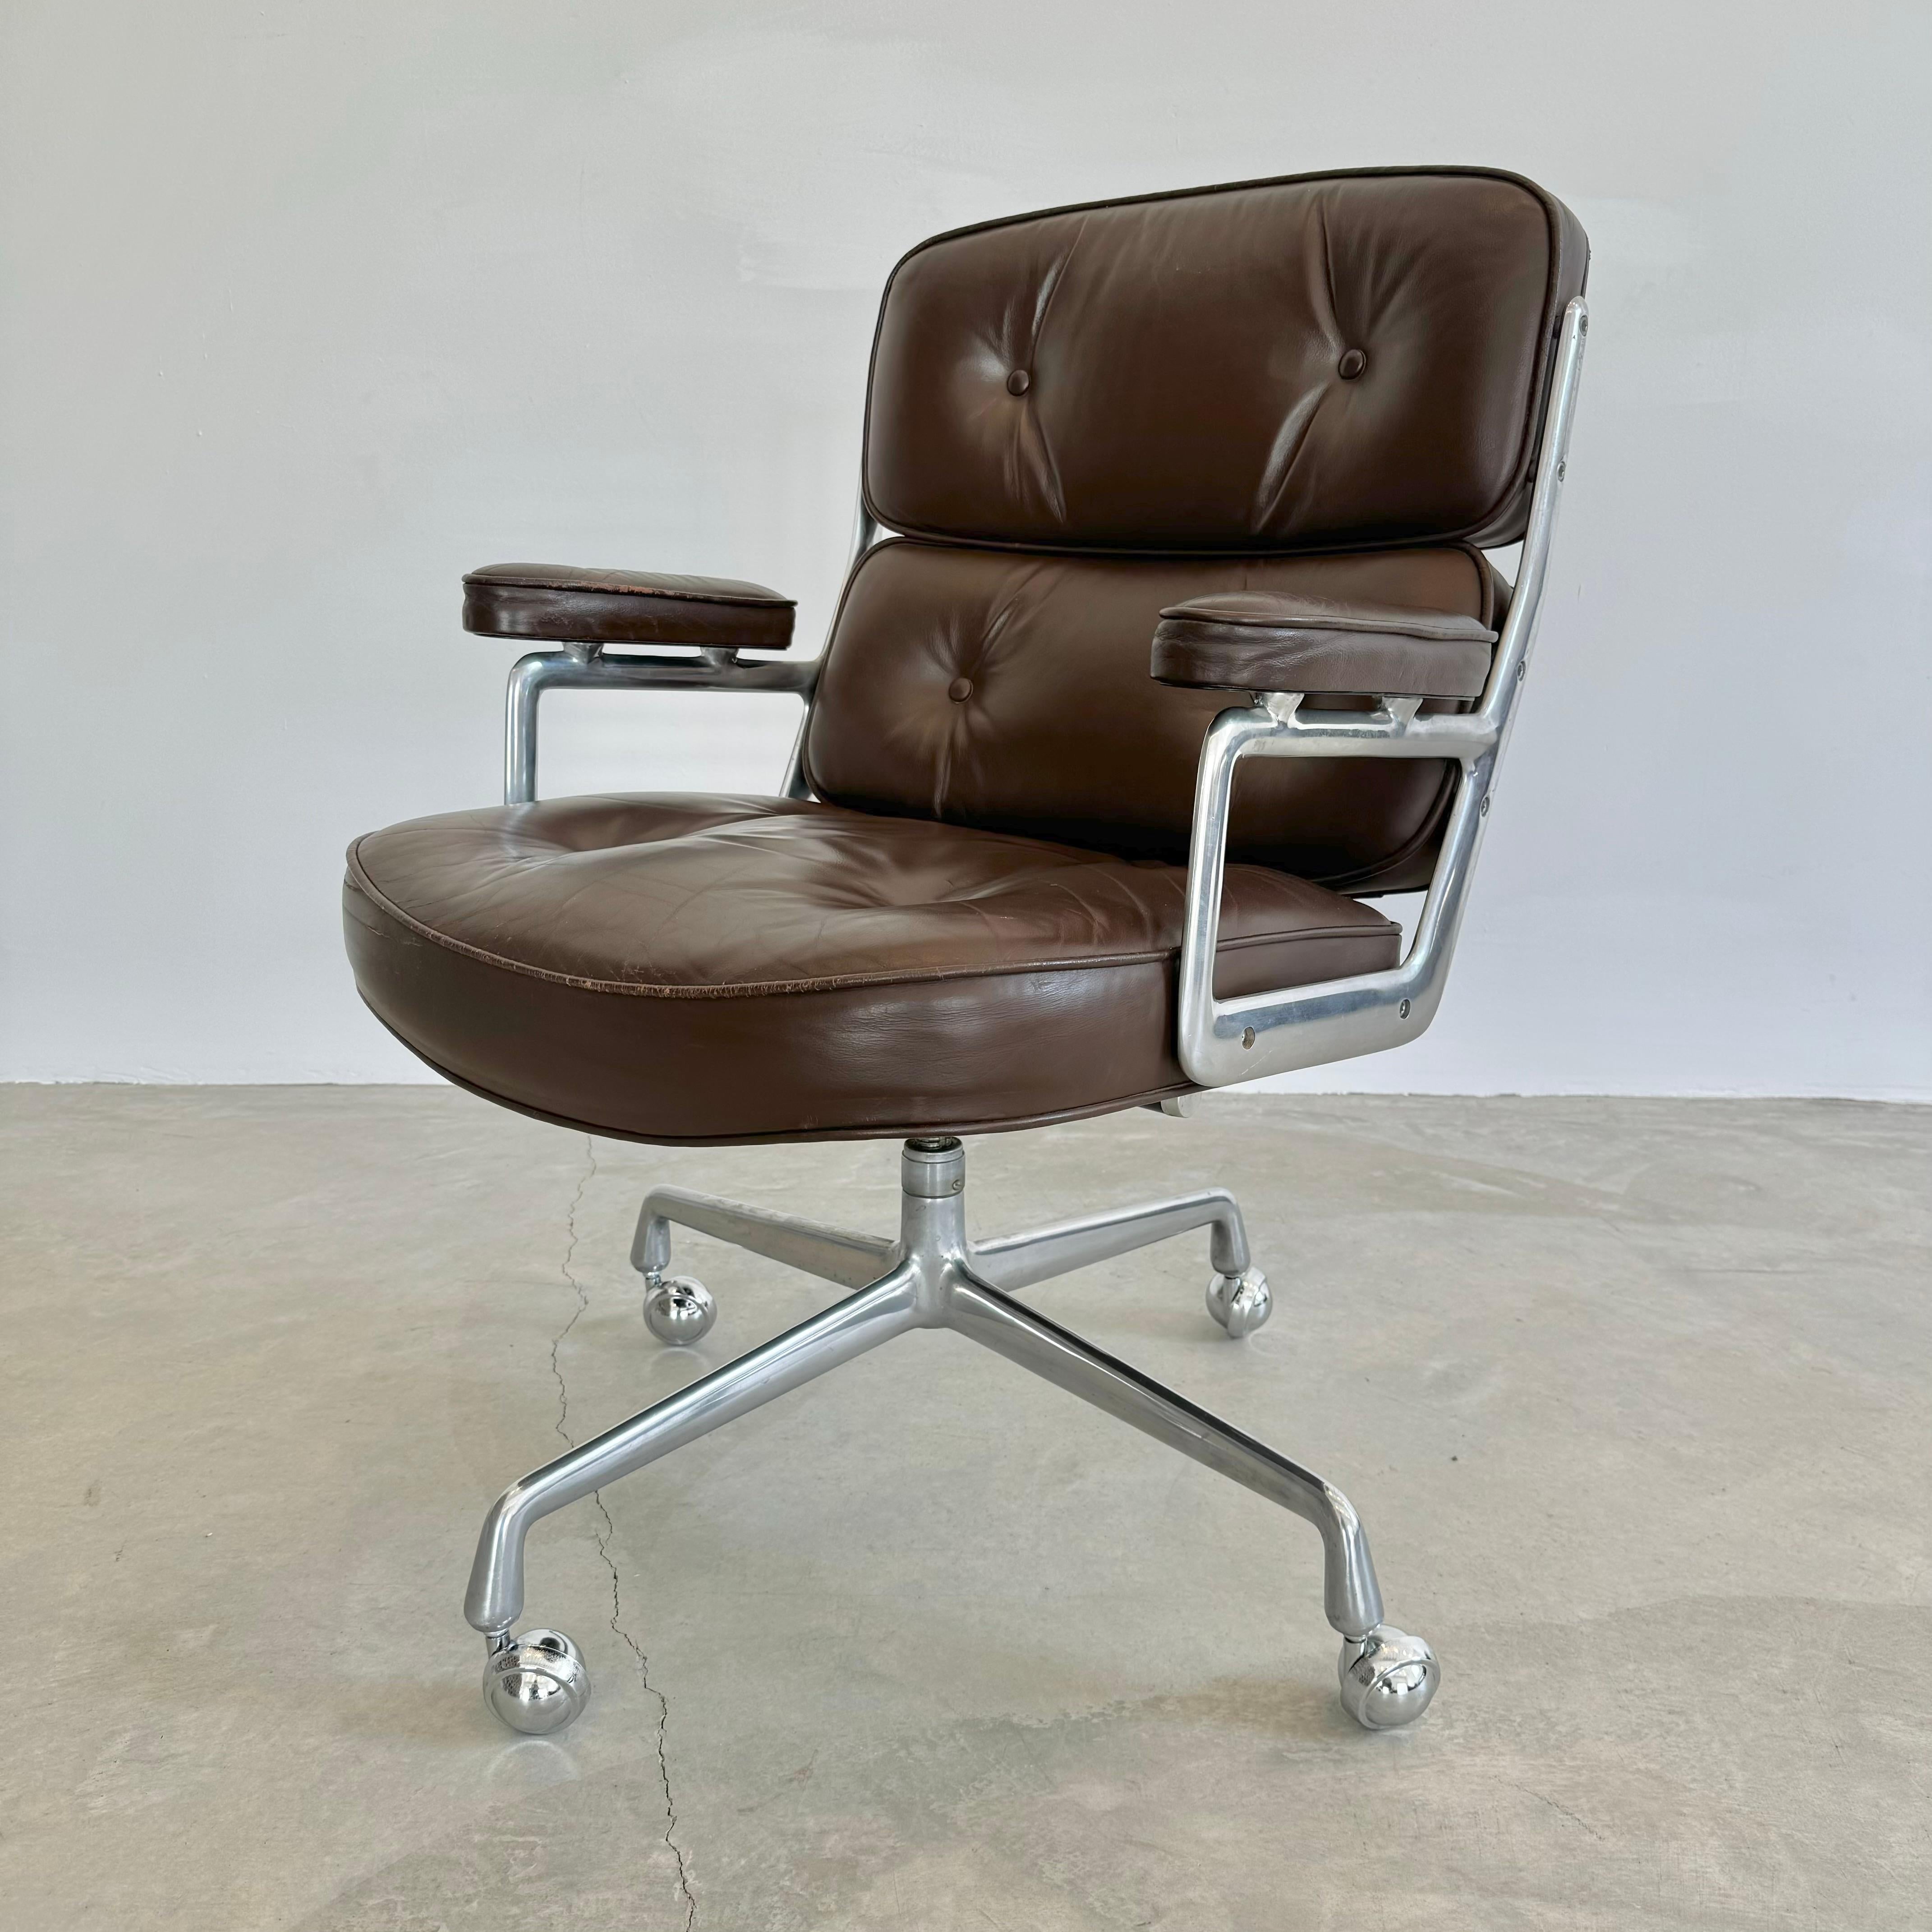 Eames Time Life Chair in Chocolate Leather for Herman Miller, 1978 USA For Sale 3